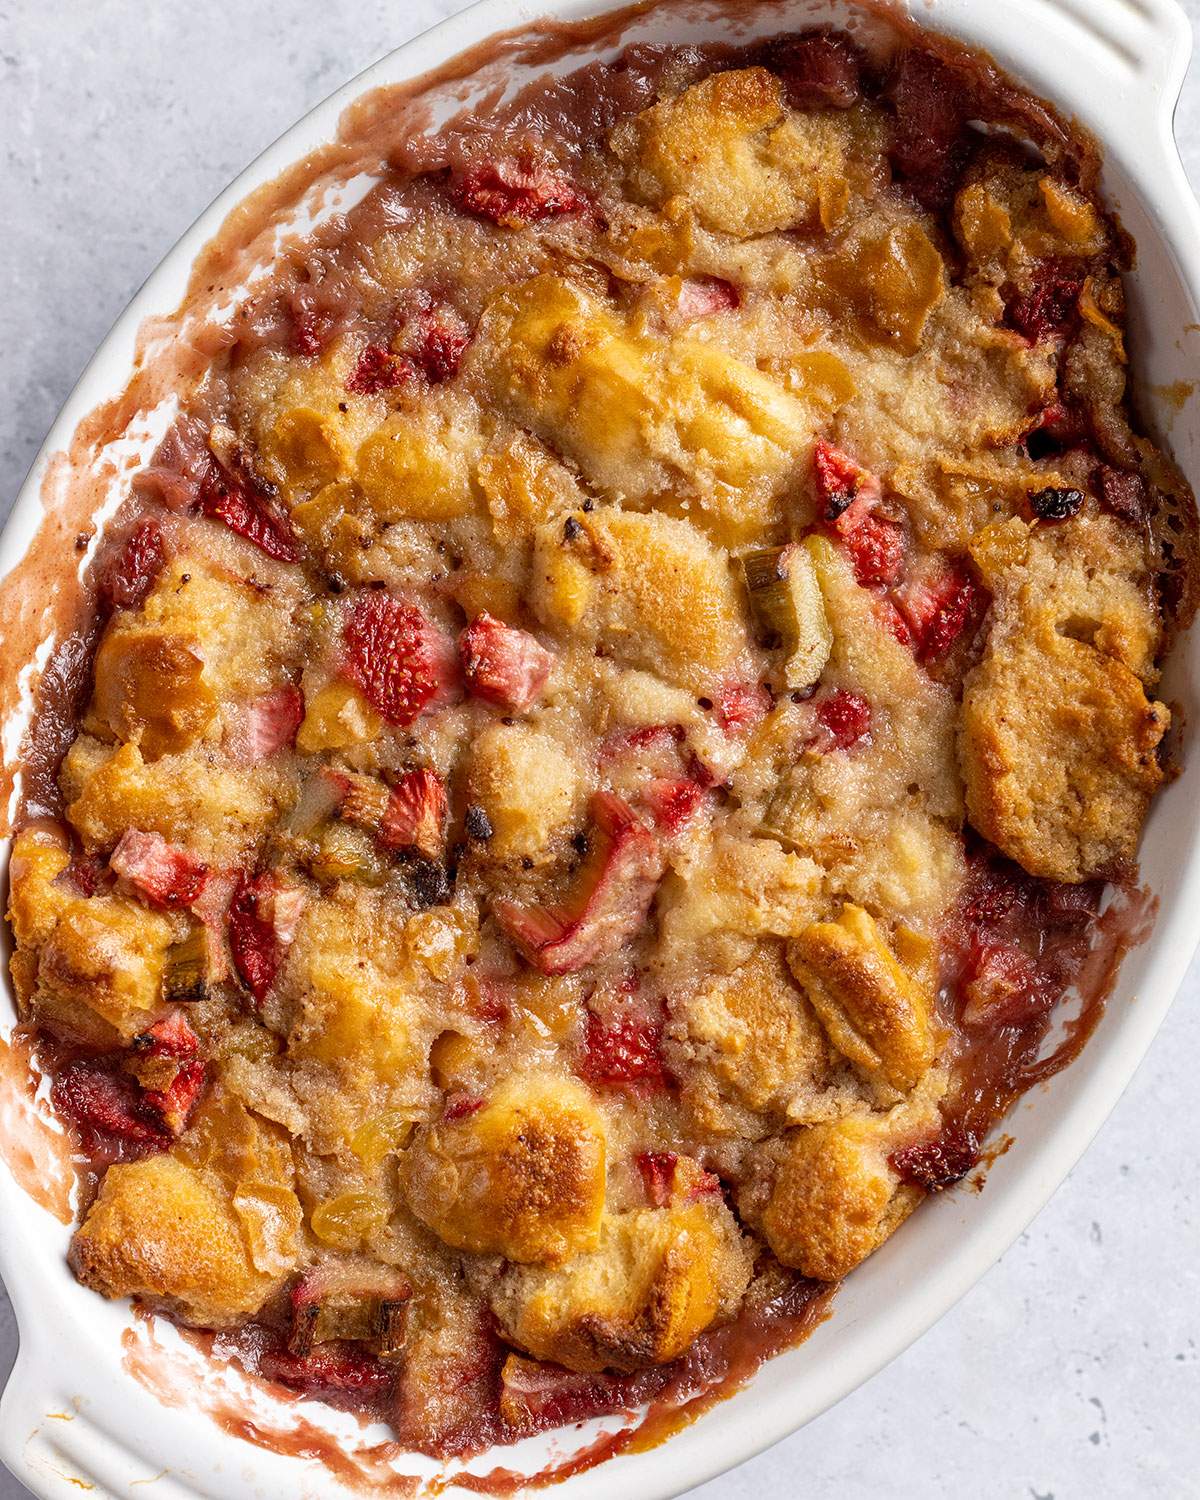 Strawberry and Rhubarb bread pudding in a white oven dish after baking.